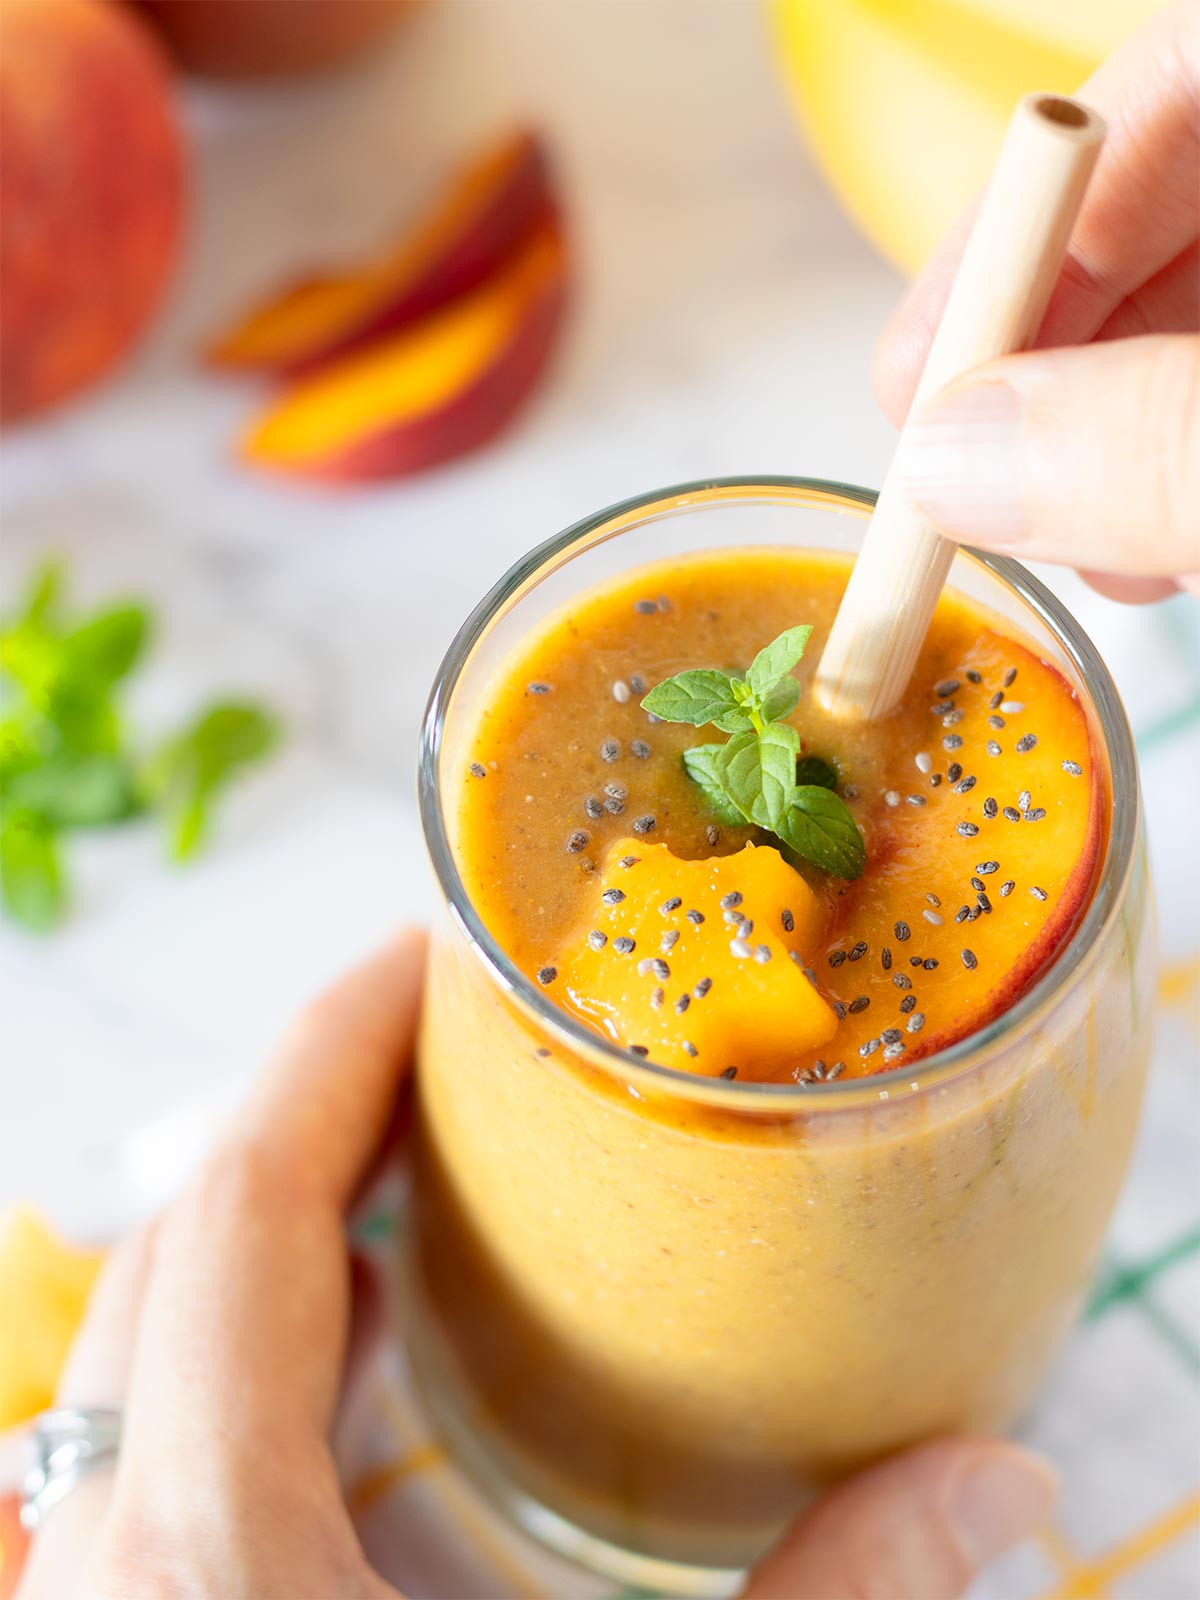 Healthy peach and banana smoothie without yogurt for weight loss.